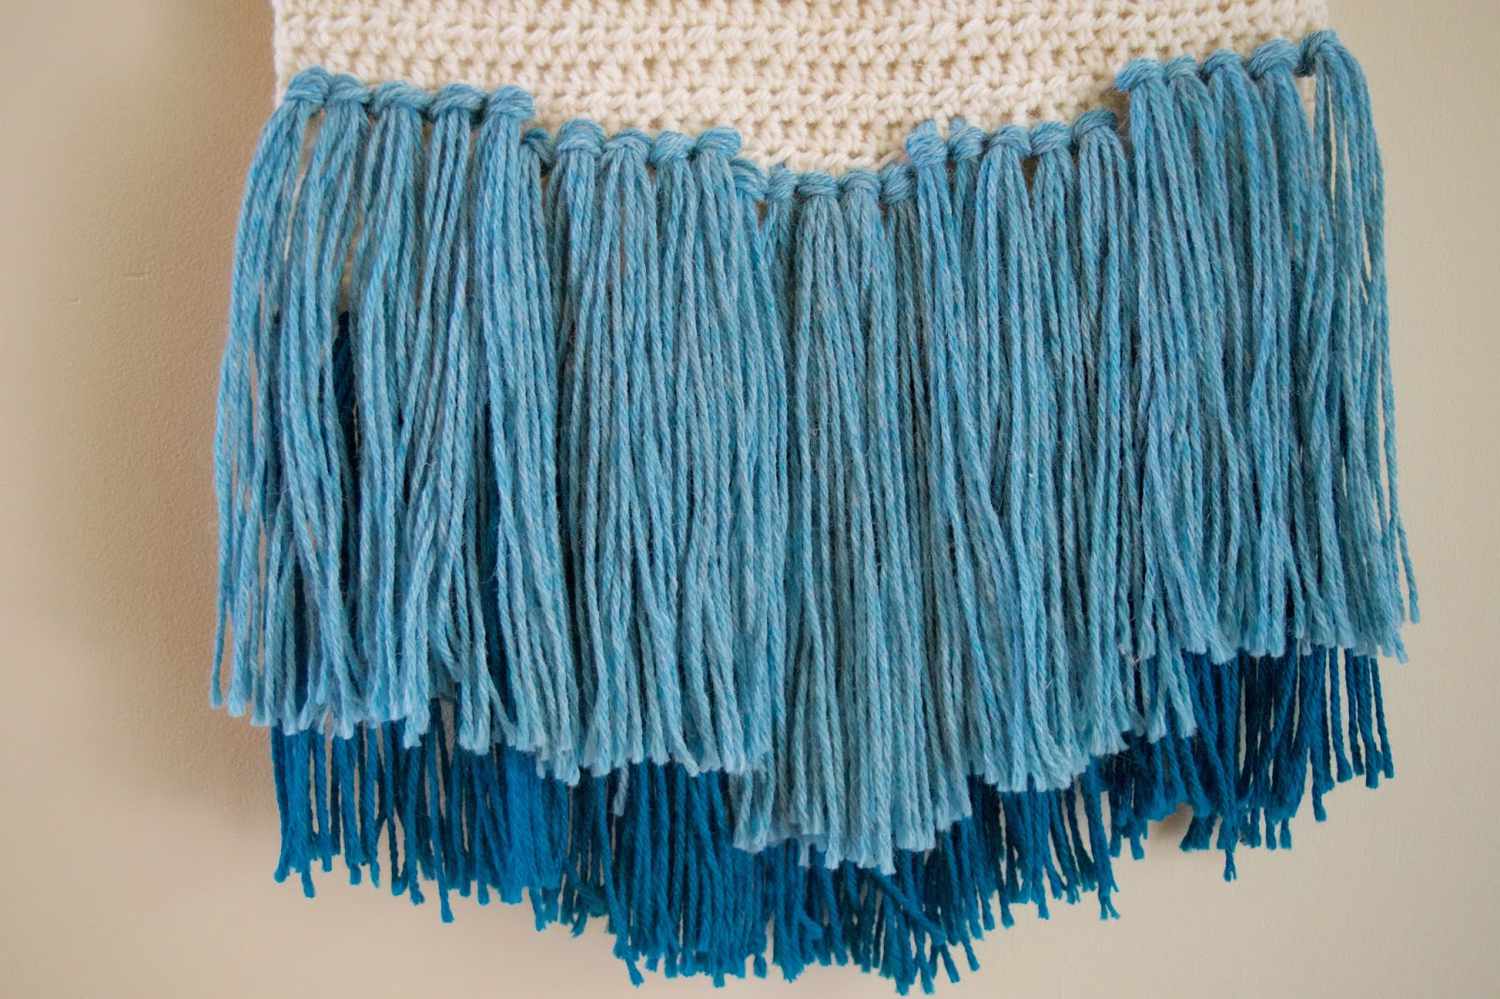 Crochet Wall Hanging with Fringe